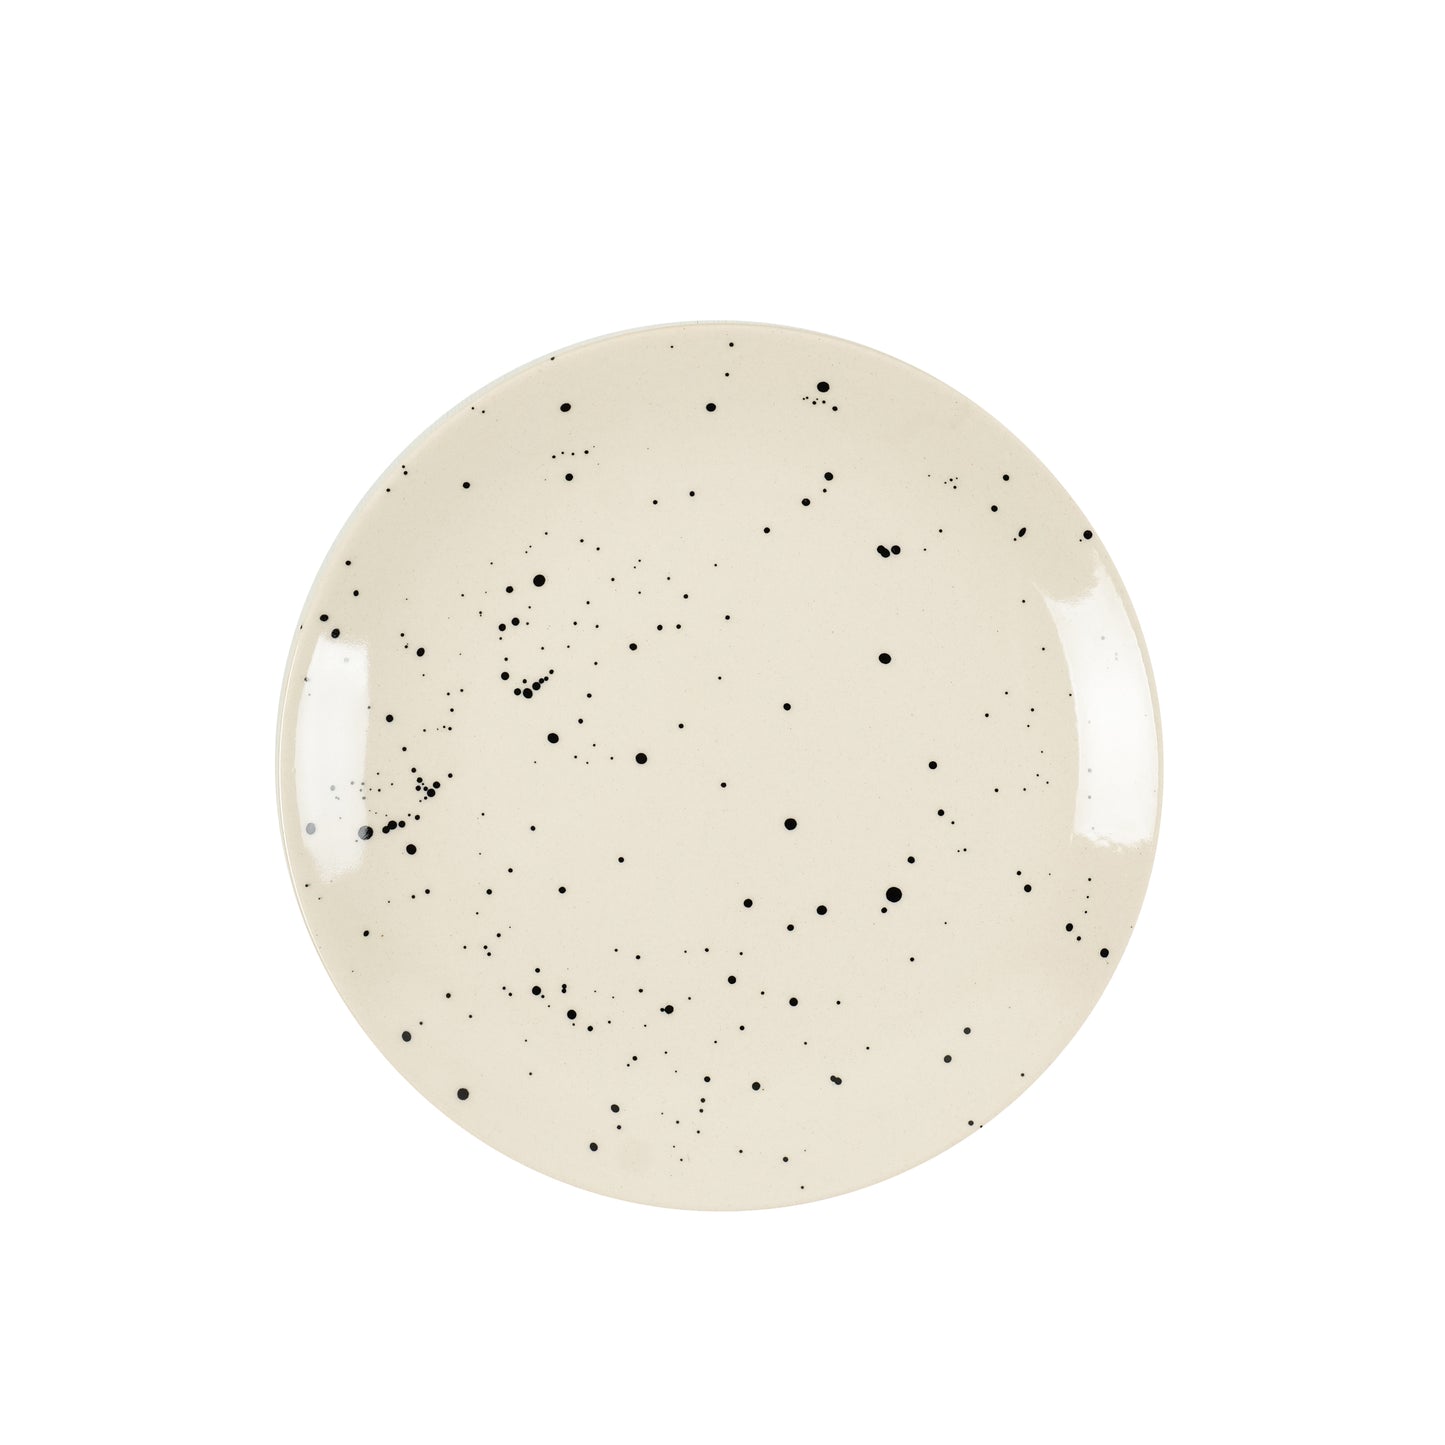 'Smokey Marble' Ceramic Side and Quarter Plates, Set of 6 (7 Inch)